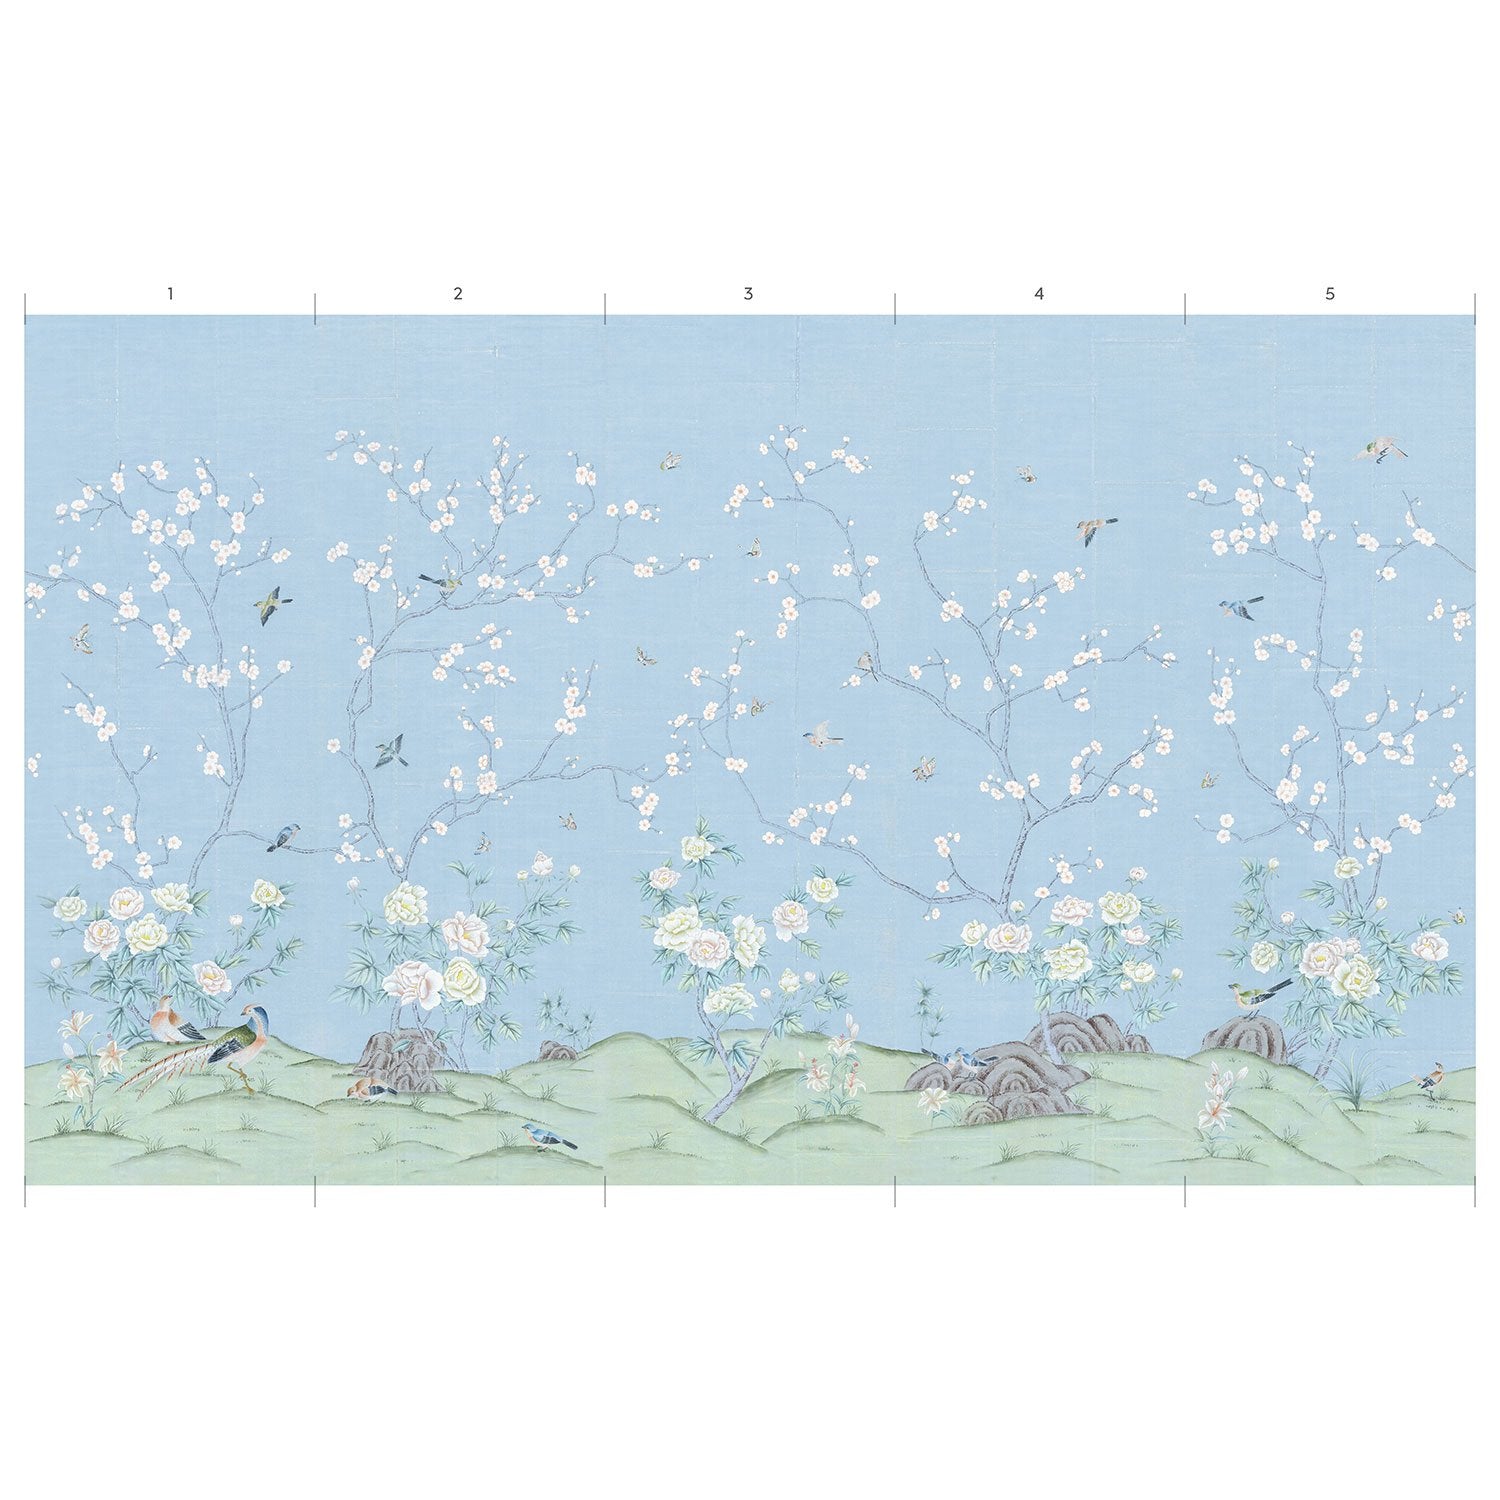 Panels of Pierre in Robins Egg Blue Chinoiserie Wallpaper Mural